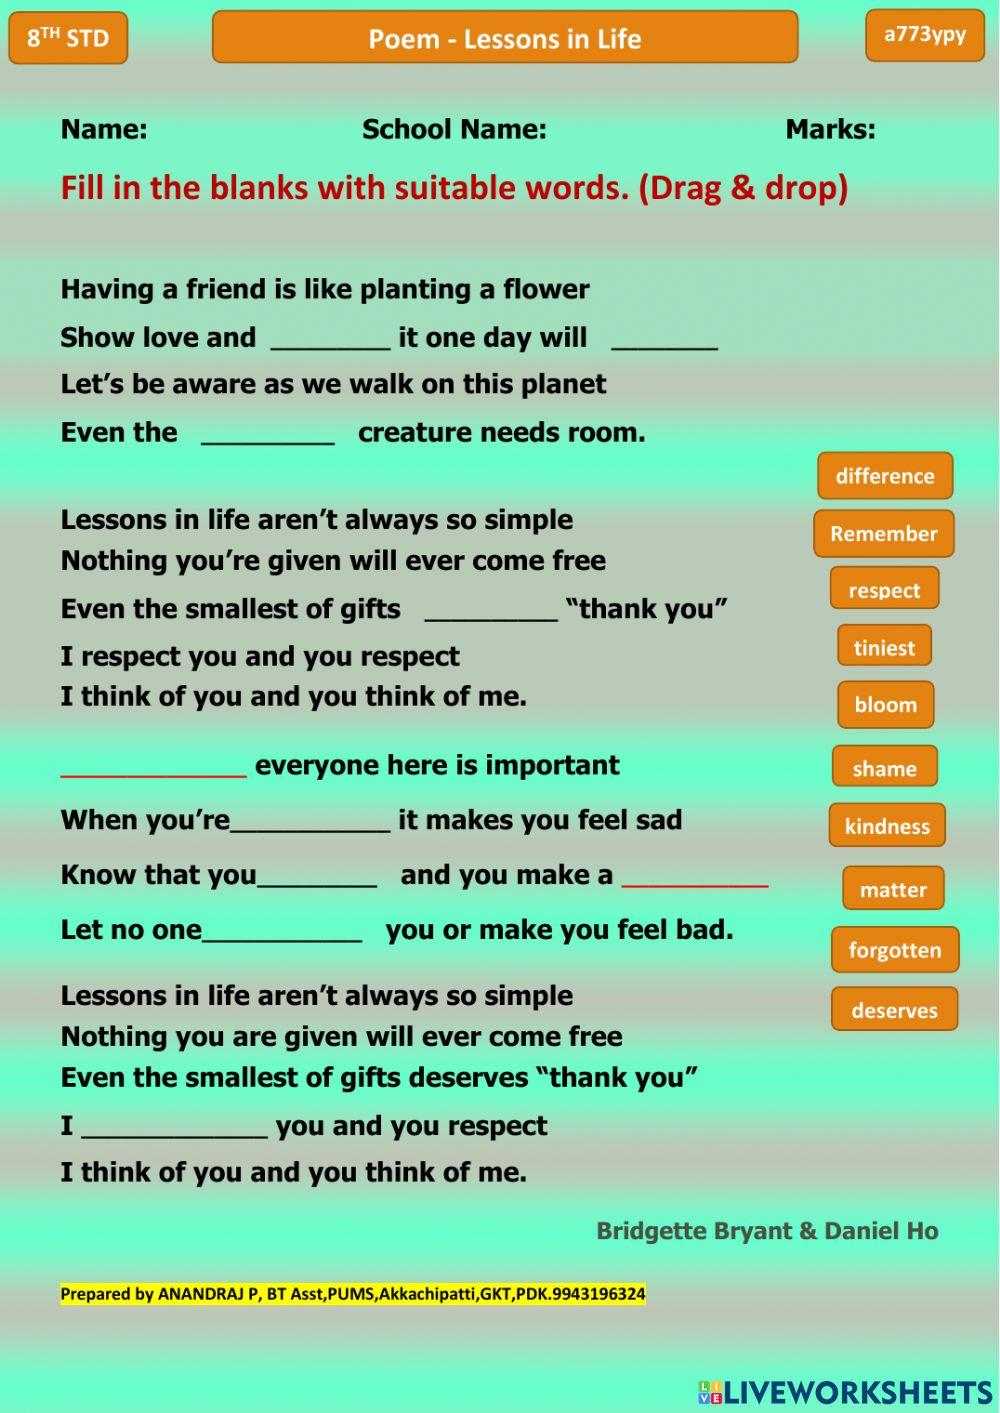 Lessons in Life -Poem